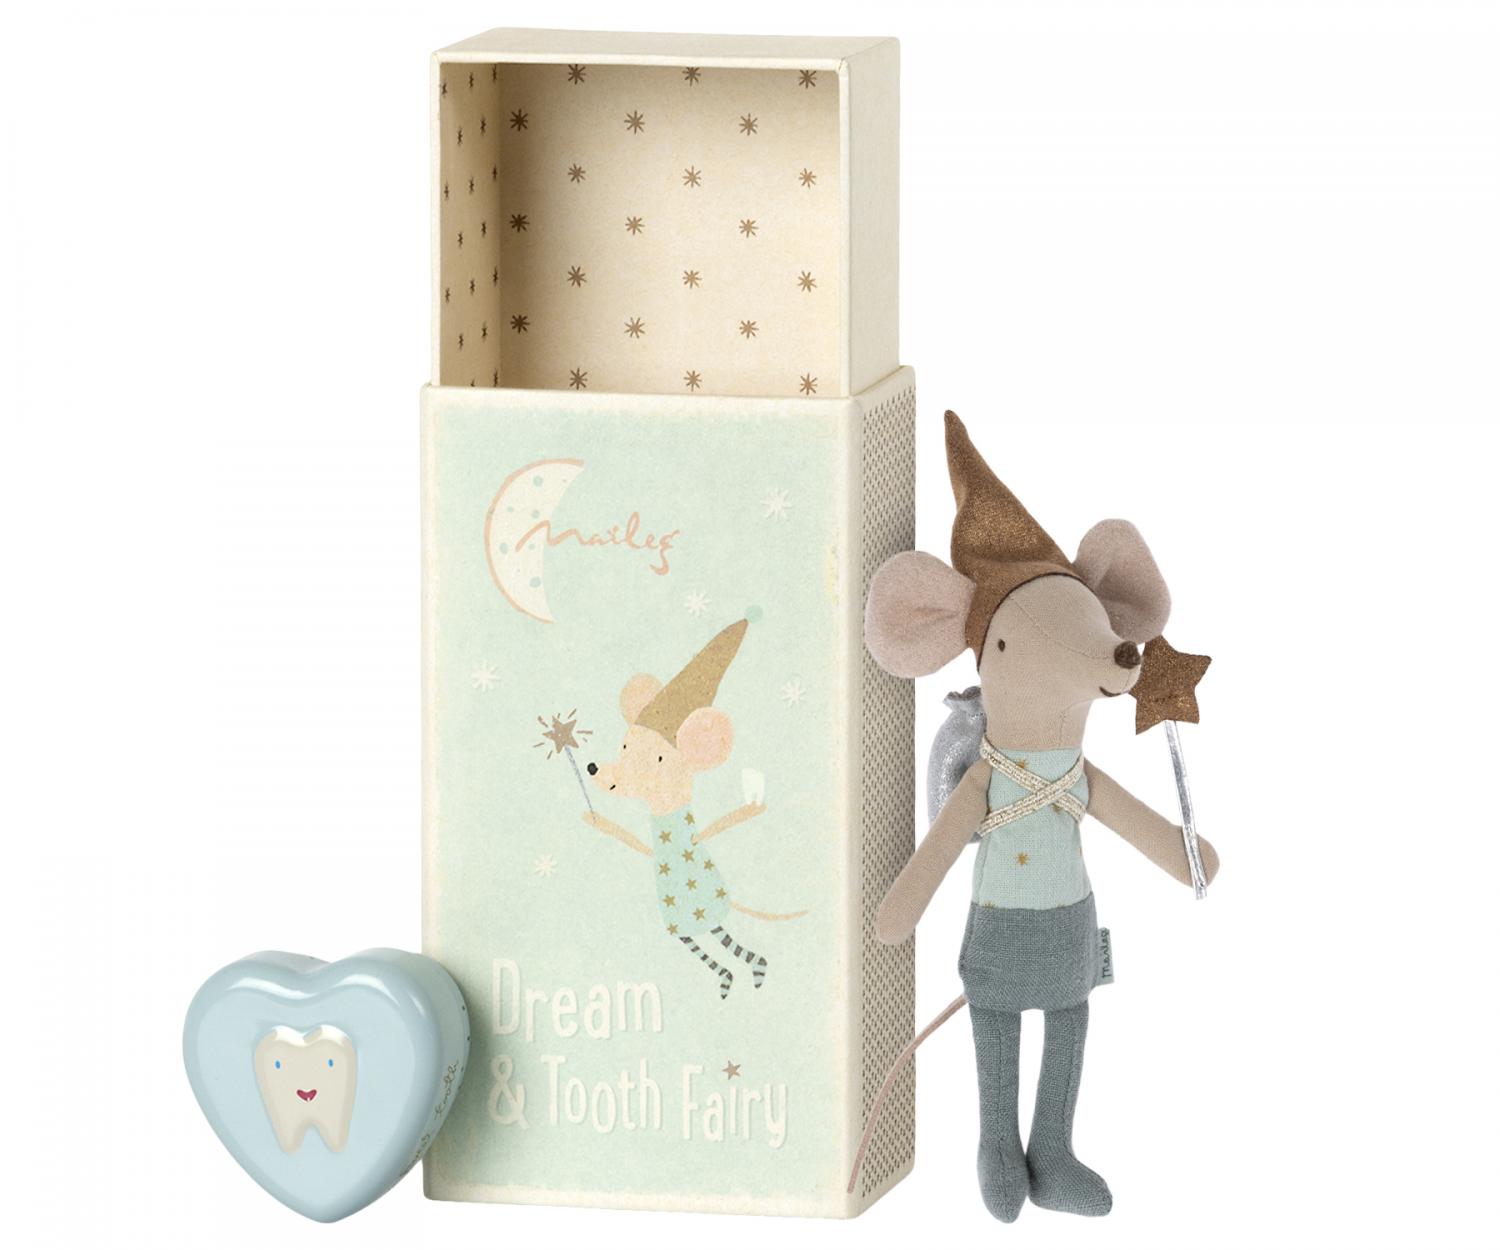 Mouse, tooth fairy in box